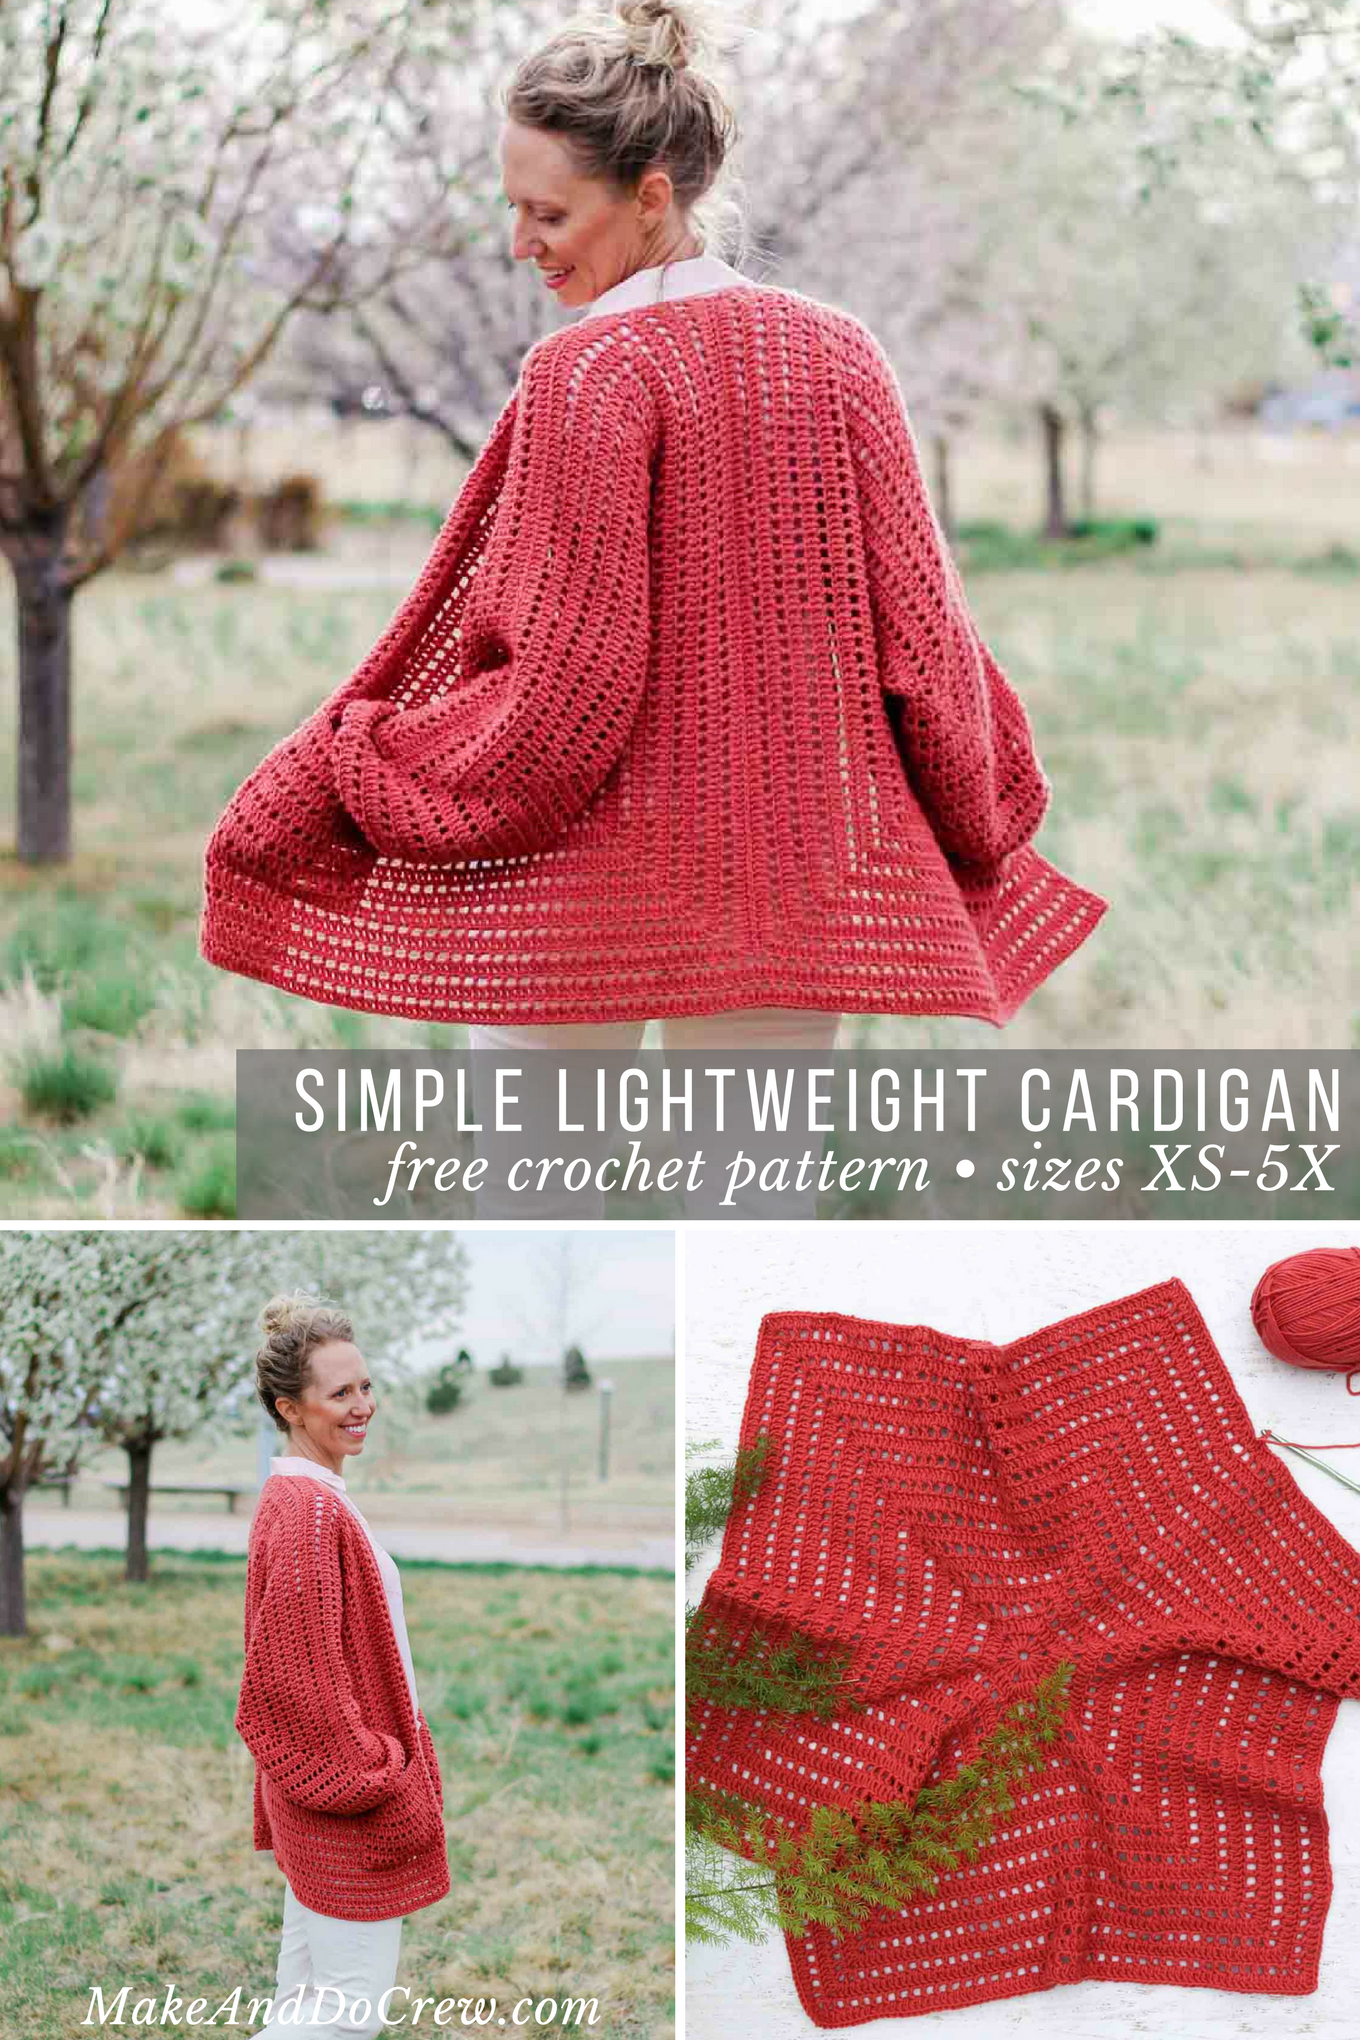 Easy Crochet Vest Pattern Free Easy Crochet Sweater Pattern A Cardigan Made From 2 Hexagons